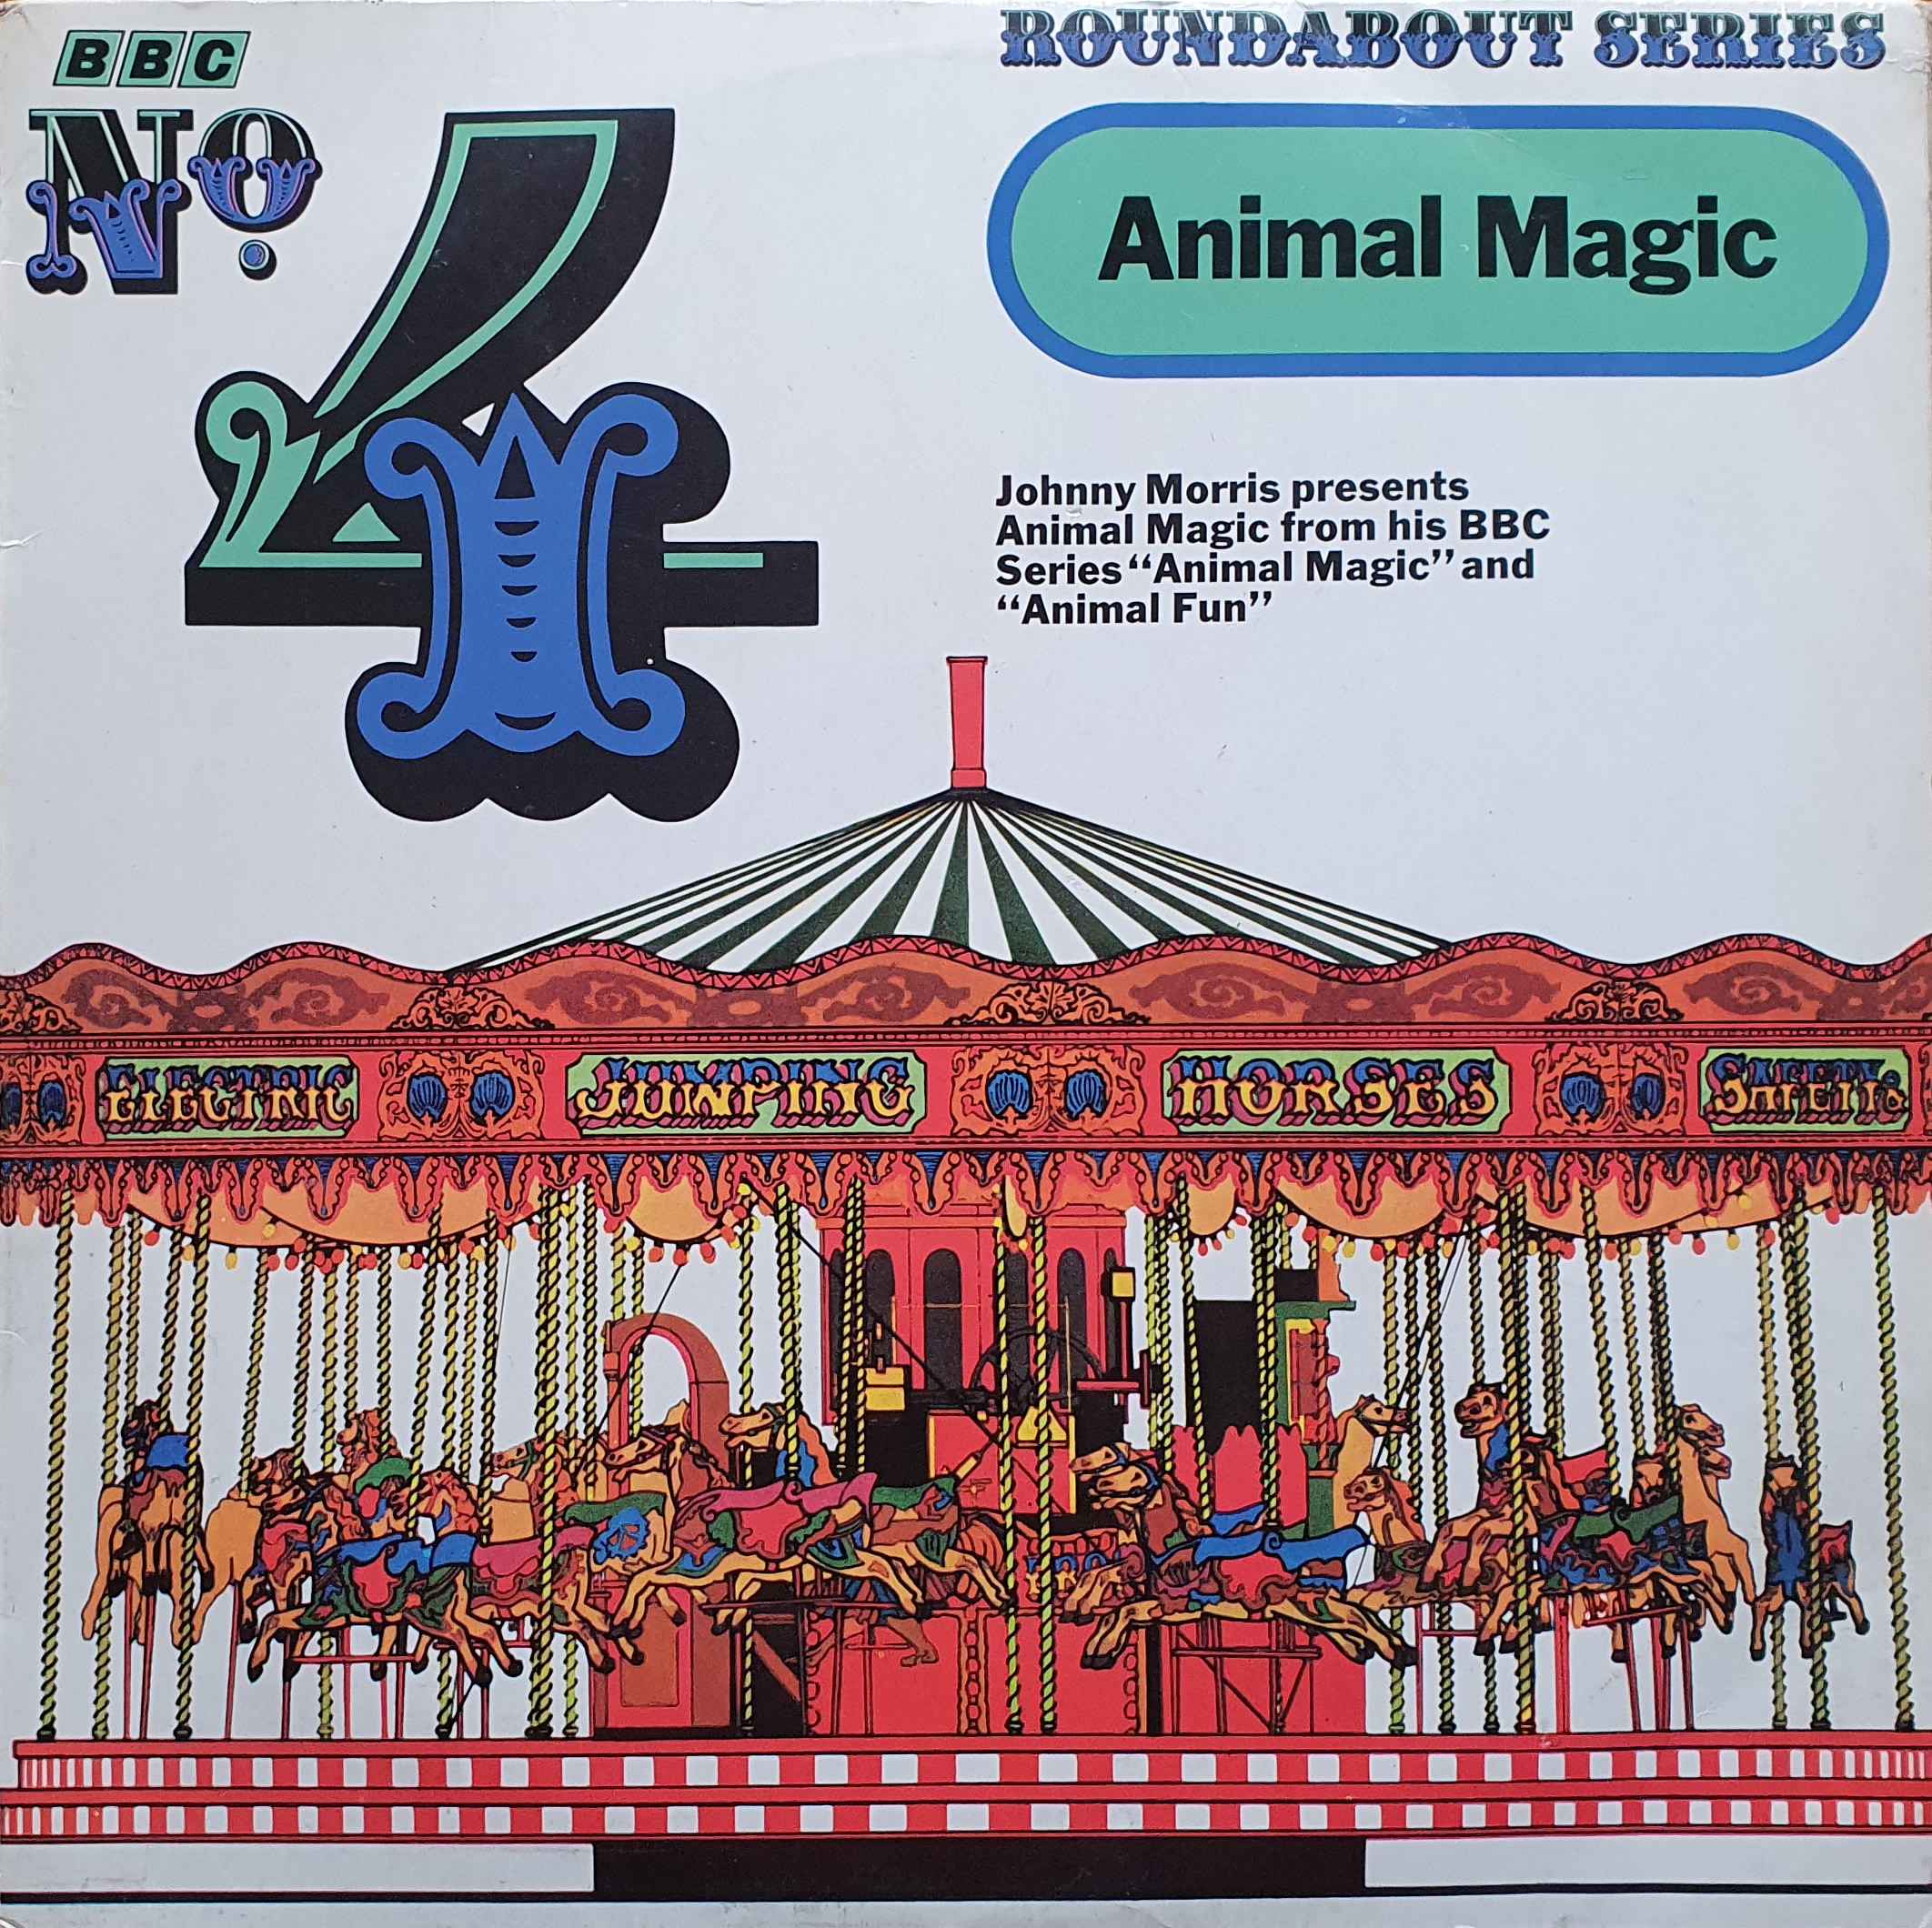 Picture of Animal magic by artist Johnny Morris from the BBC albums - Records and Tapes library